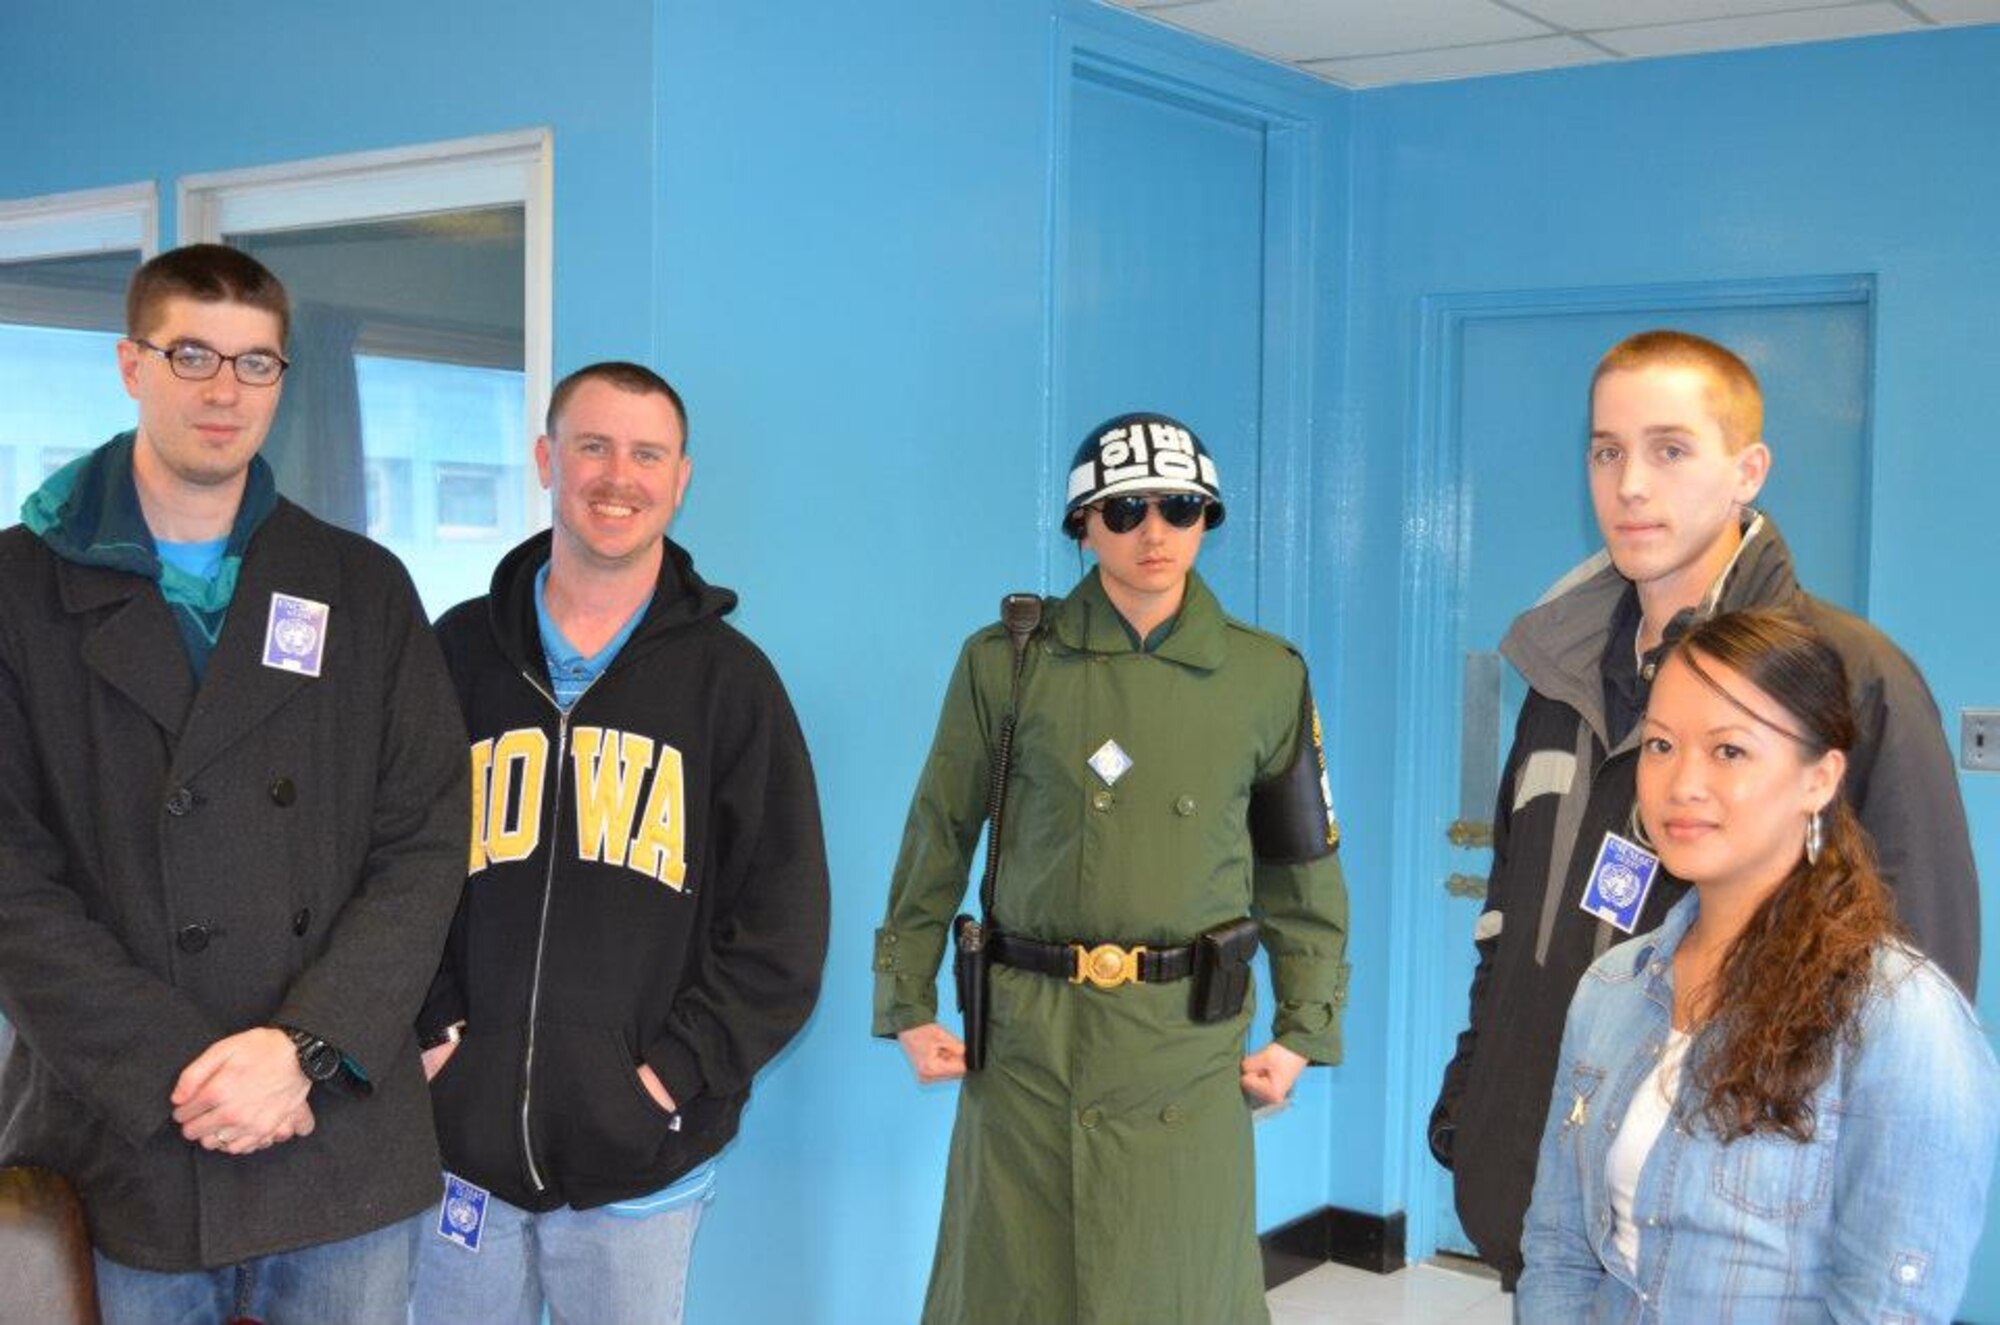 Members of the 8th Operations Support Squadron pose with a Republic of Korea Soldier on the Democratic People’s Republic of Korea side of the Conference Row Building at the Demilitarized Zone, April 19, 2013. The building is used by both North and South Korea to hold meetings in the Joint Security Area, where the Armistice Agreement of July 27, 1953 was signed. (Courtesy photo)